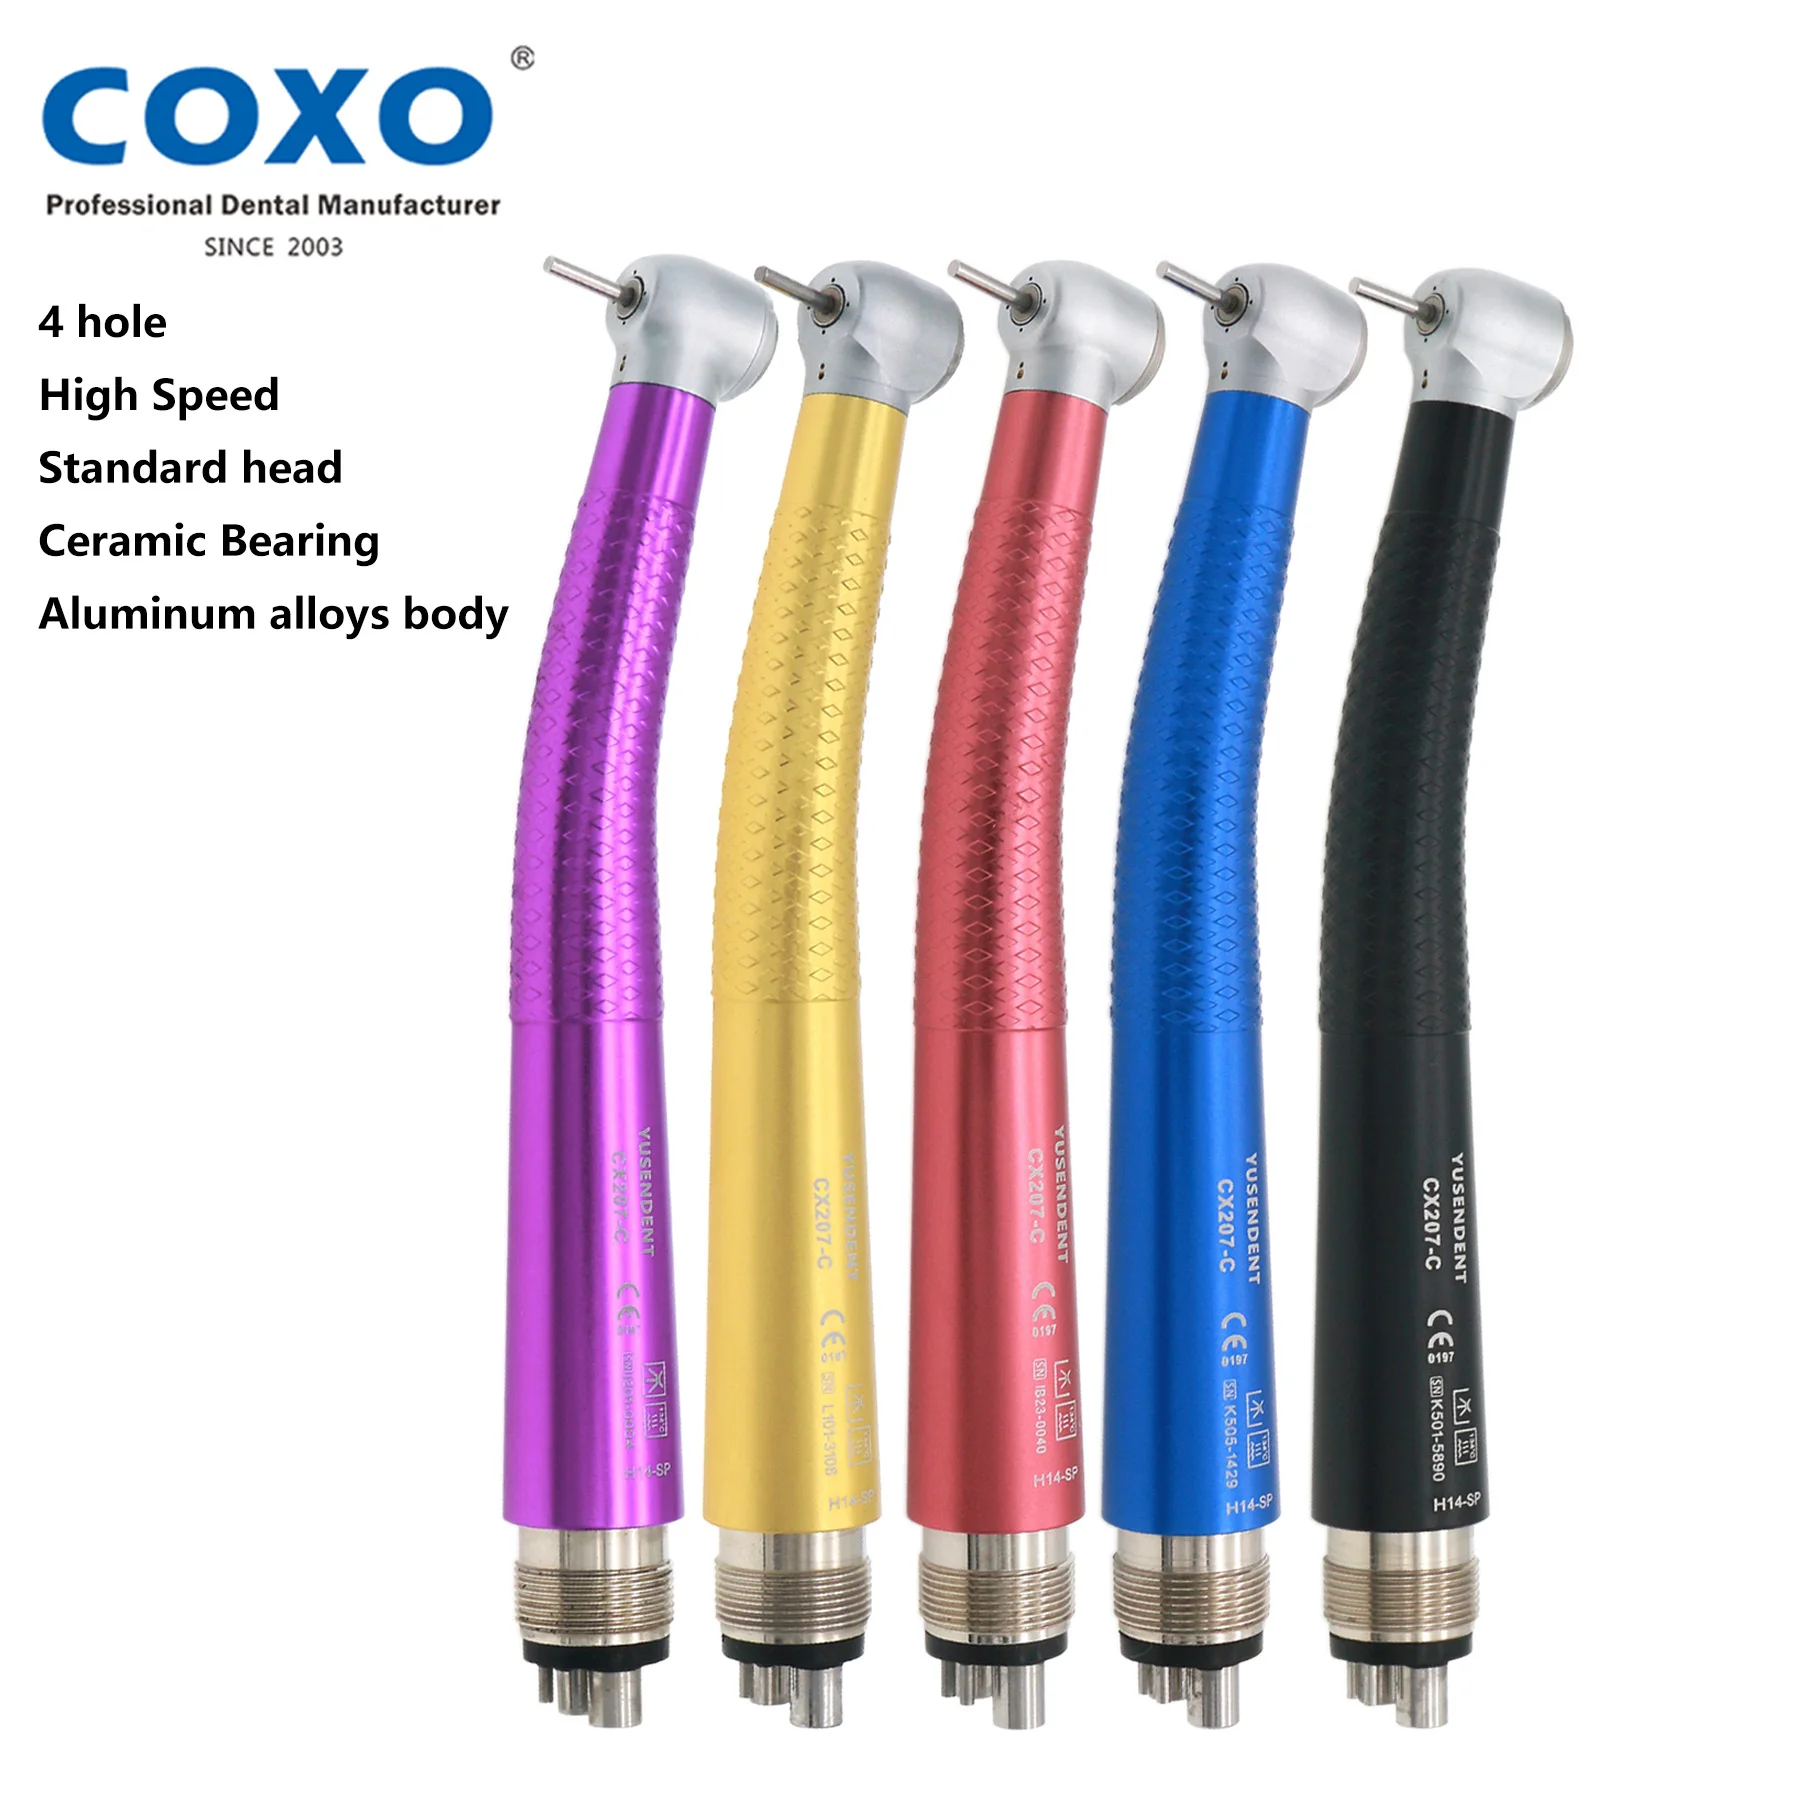 COXO Dental 4 Holes High Speed Colorful Push Button Handpiece Standard head